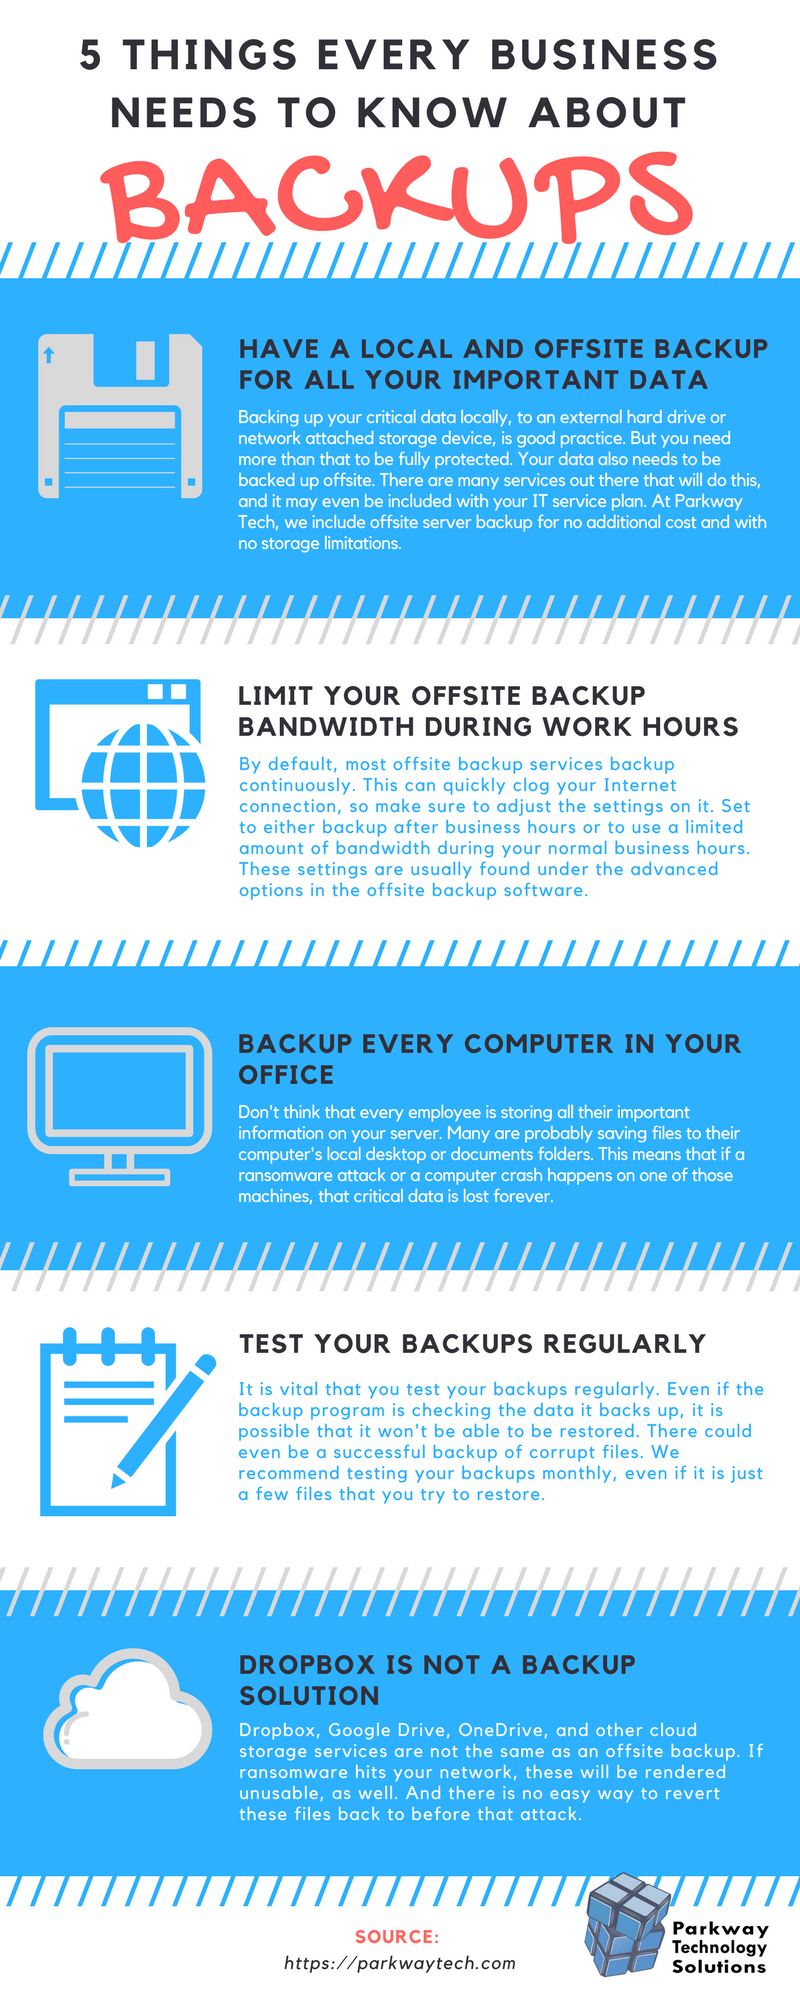 5-Things-Every-Business-Needs-to-Know-About-Business-Backup